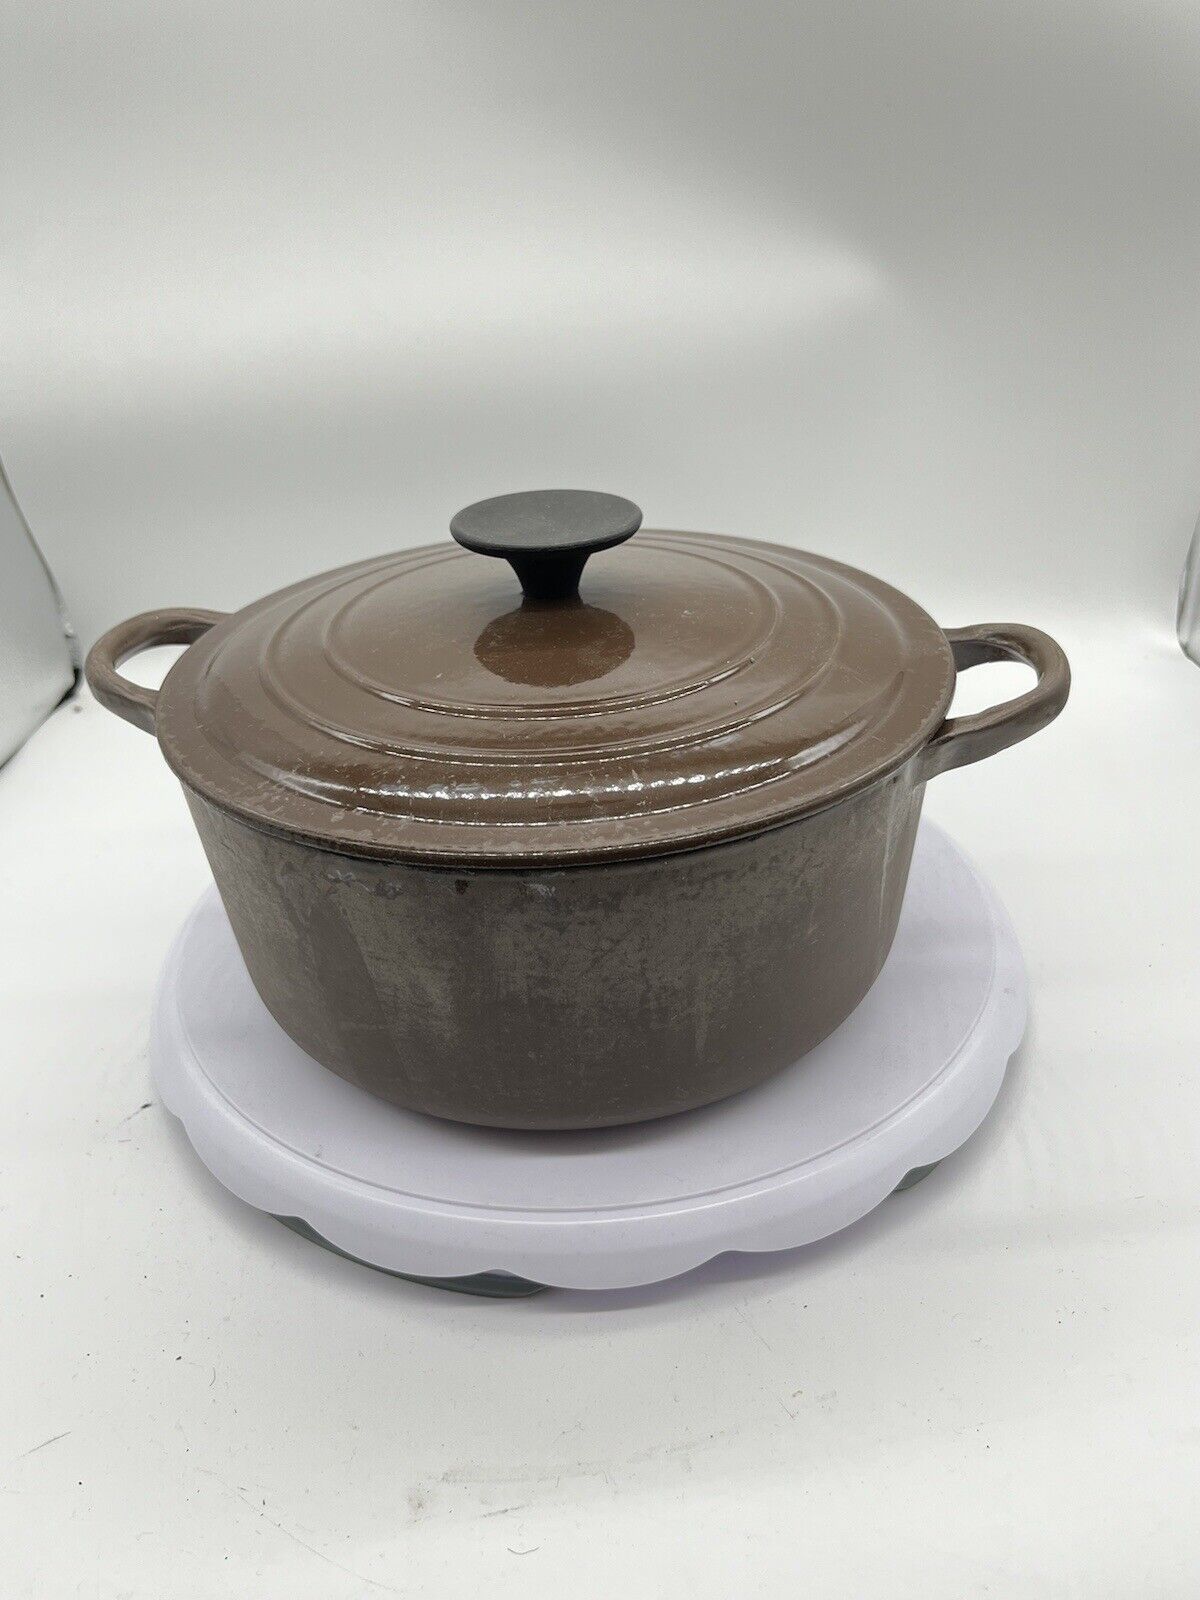 Le Creuset Enameled Cast Iron Dutch Oven D Brown Made In France 3.5 QT